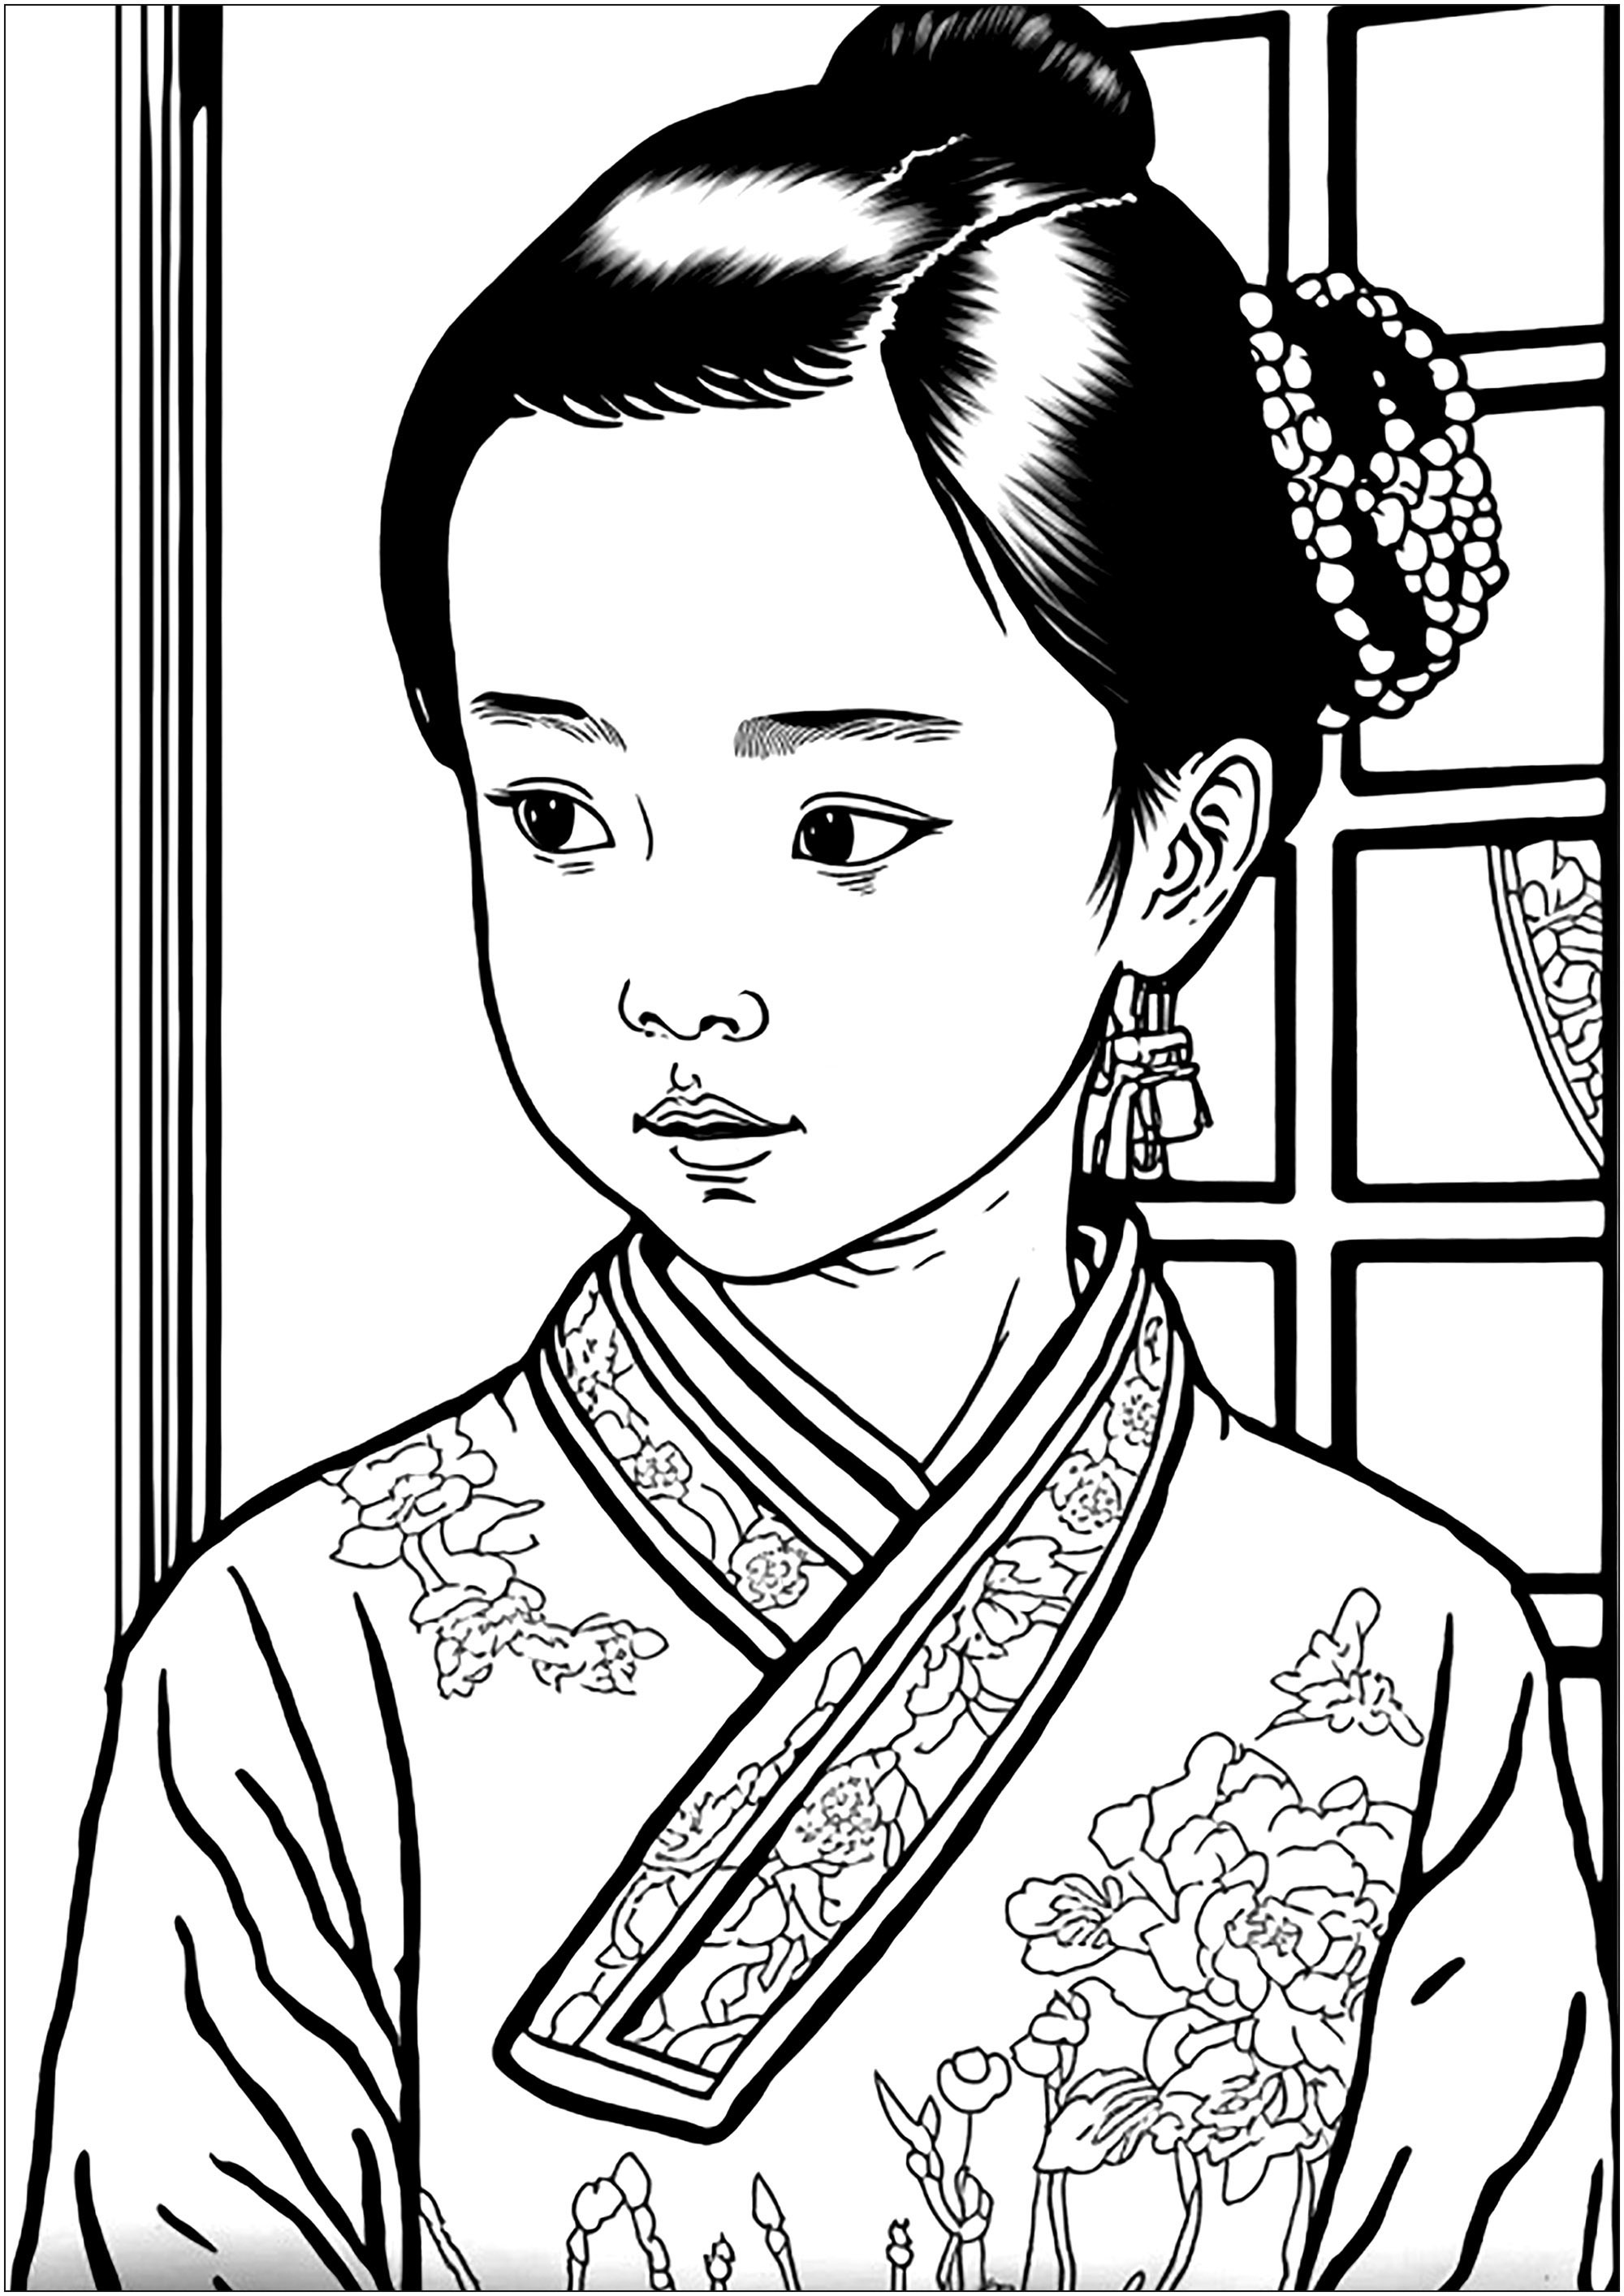 A coloring inspired by the portrait of a young Chinese woman